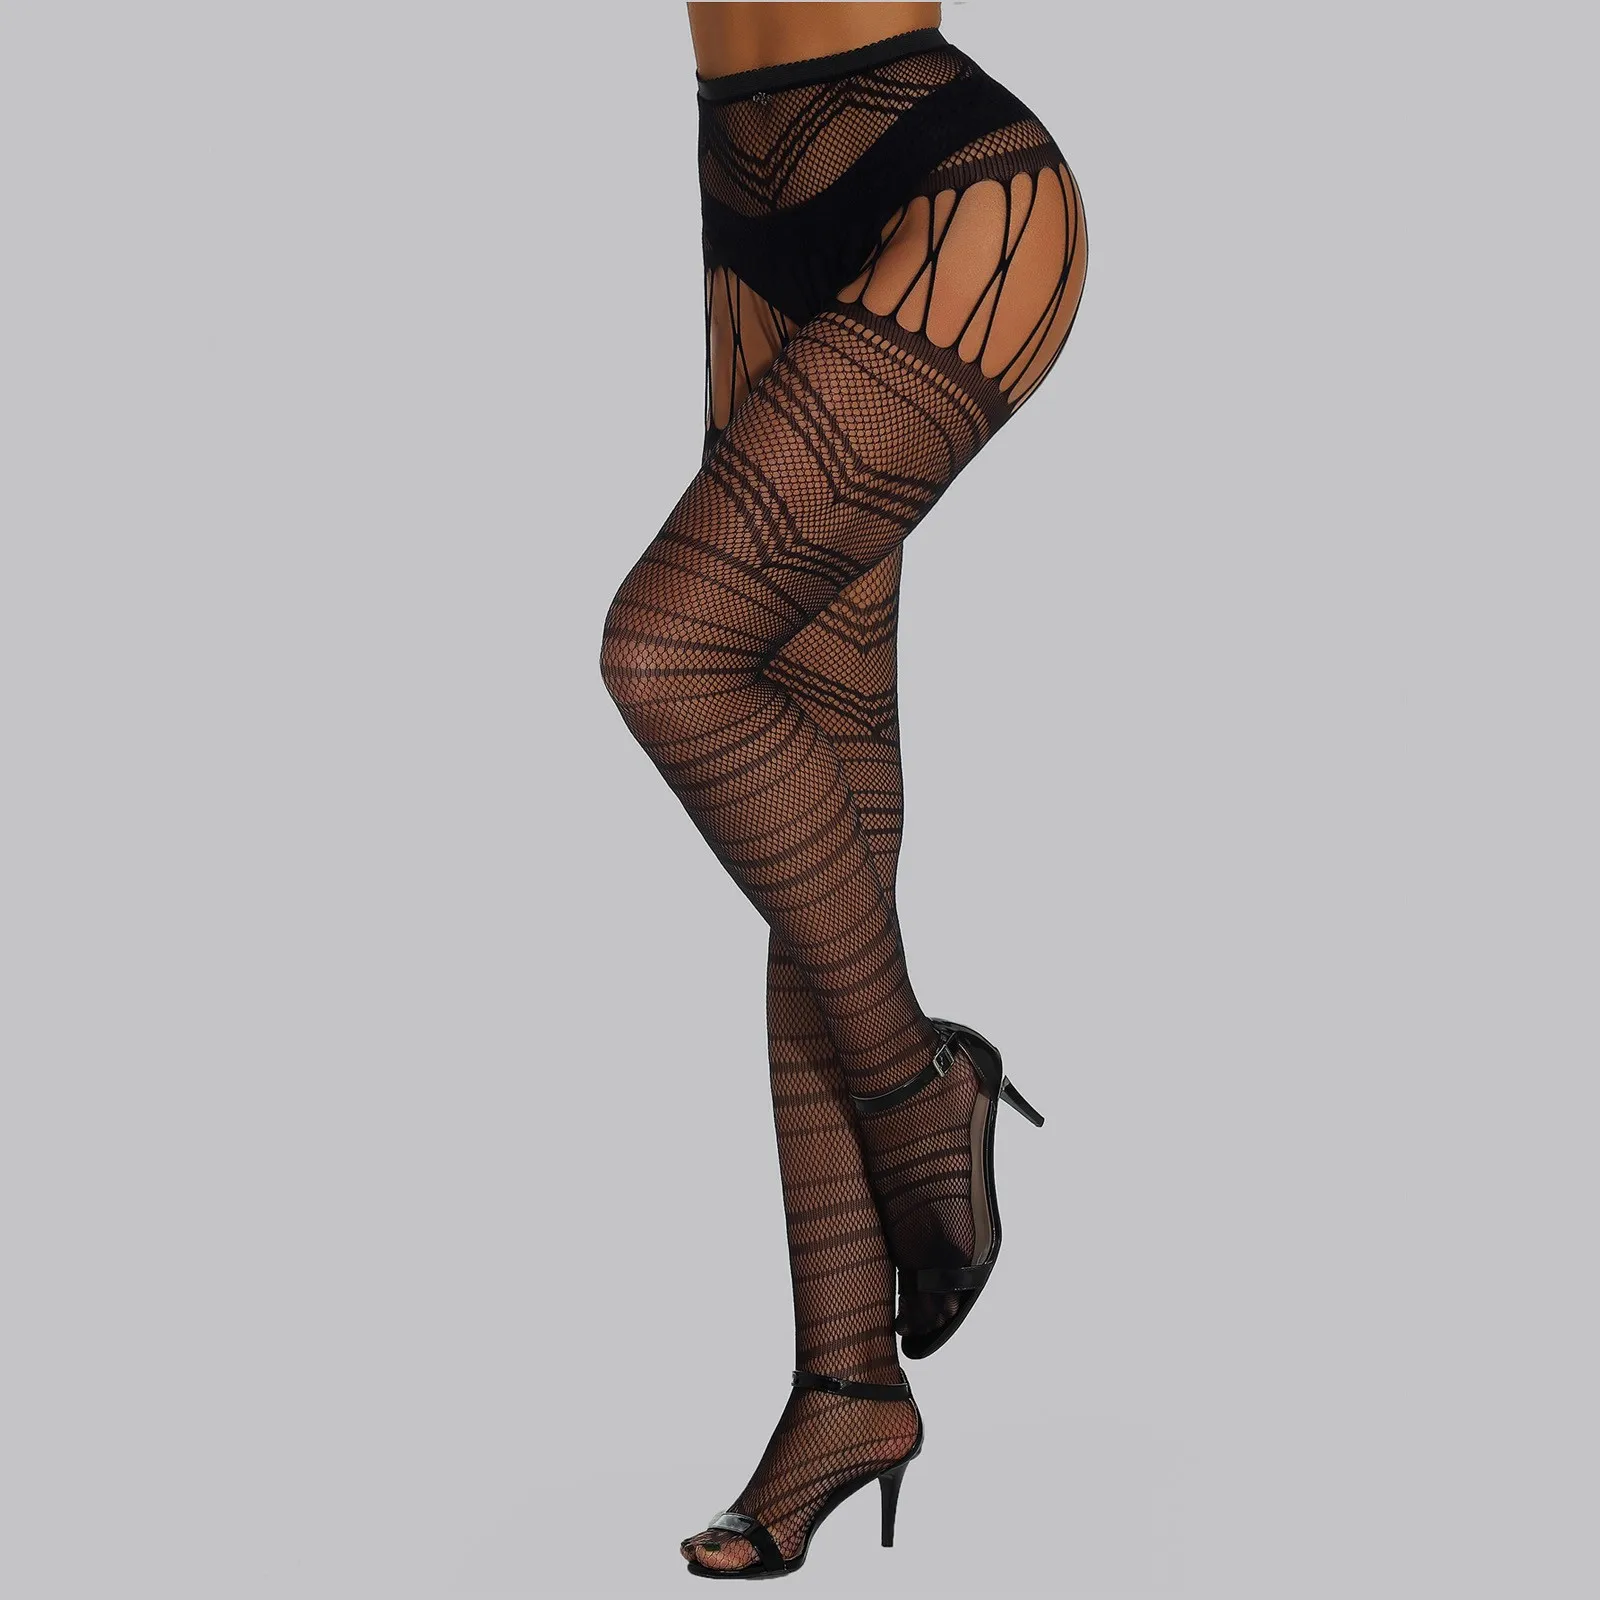 

New Sexy Womens Fishnet Tights Plus Size Lace Suspender Pantyhose Stocking Christmas Fashion Seductive Charming Stockings Thigh